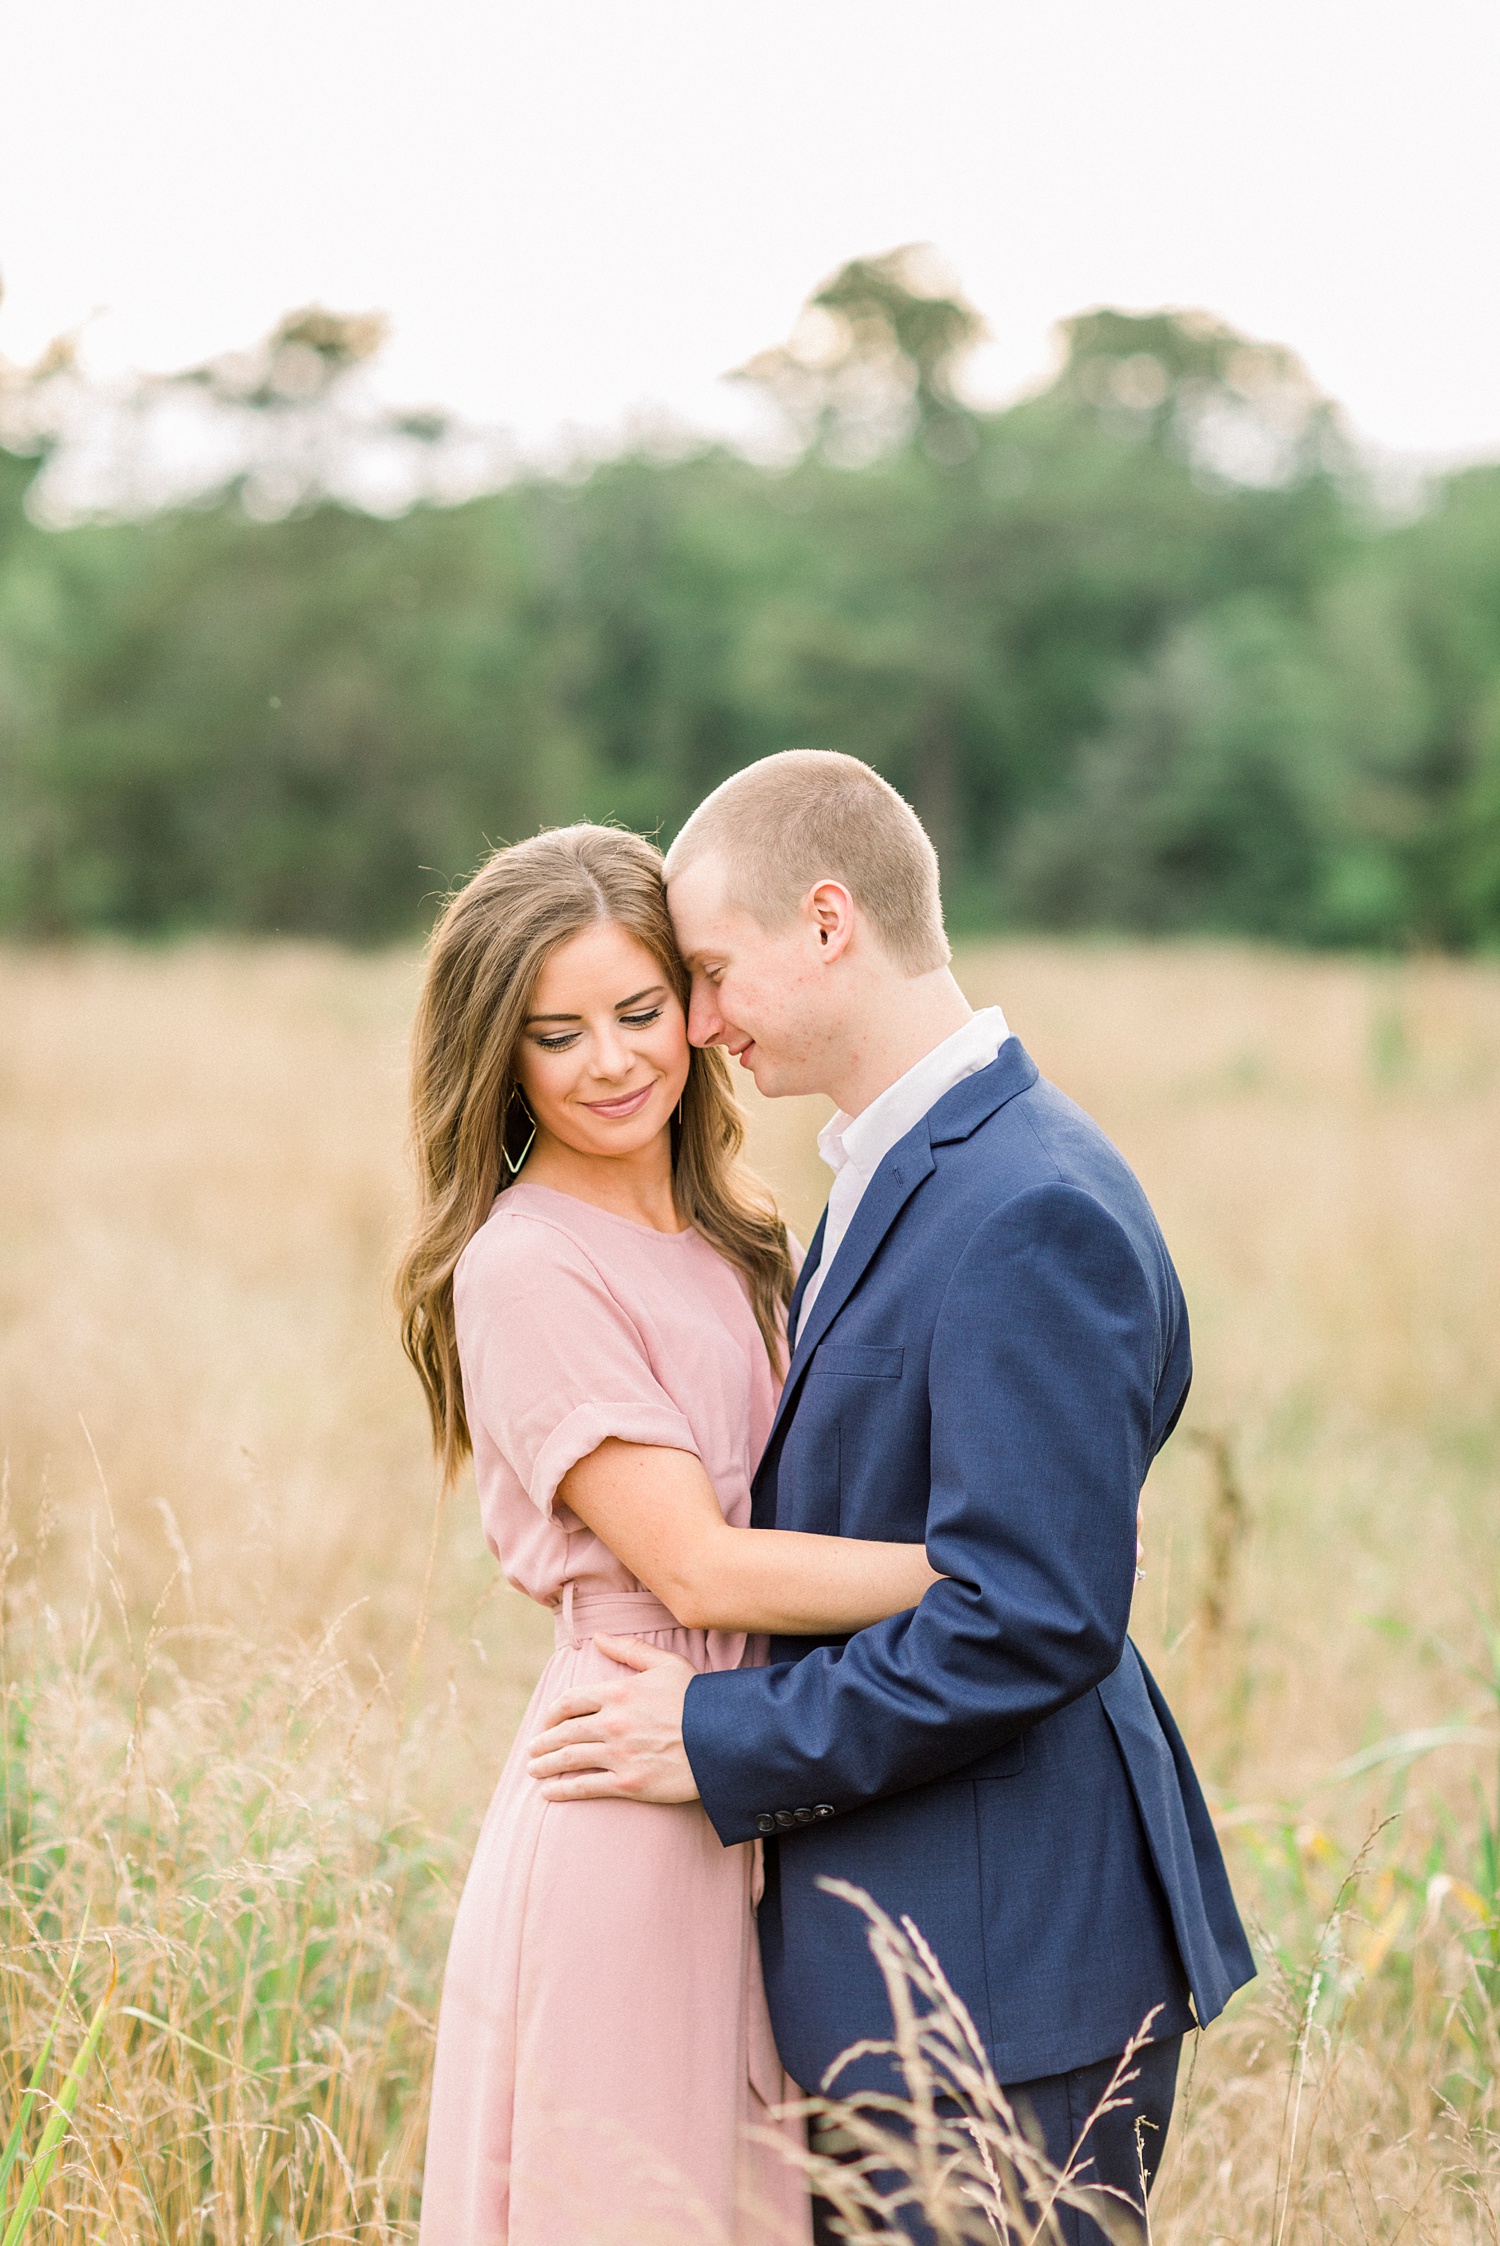 groom nuzzles bride's cheek during engagement session in tall grass